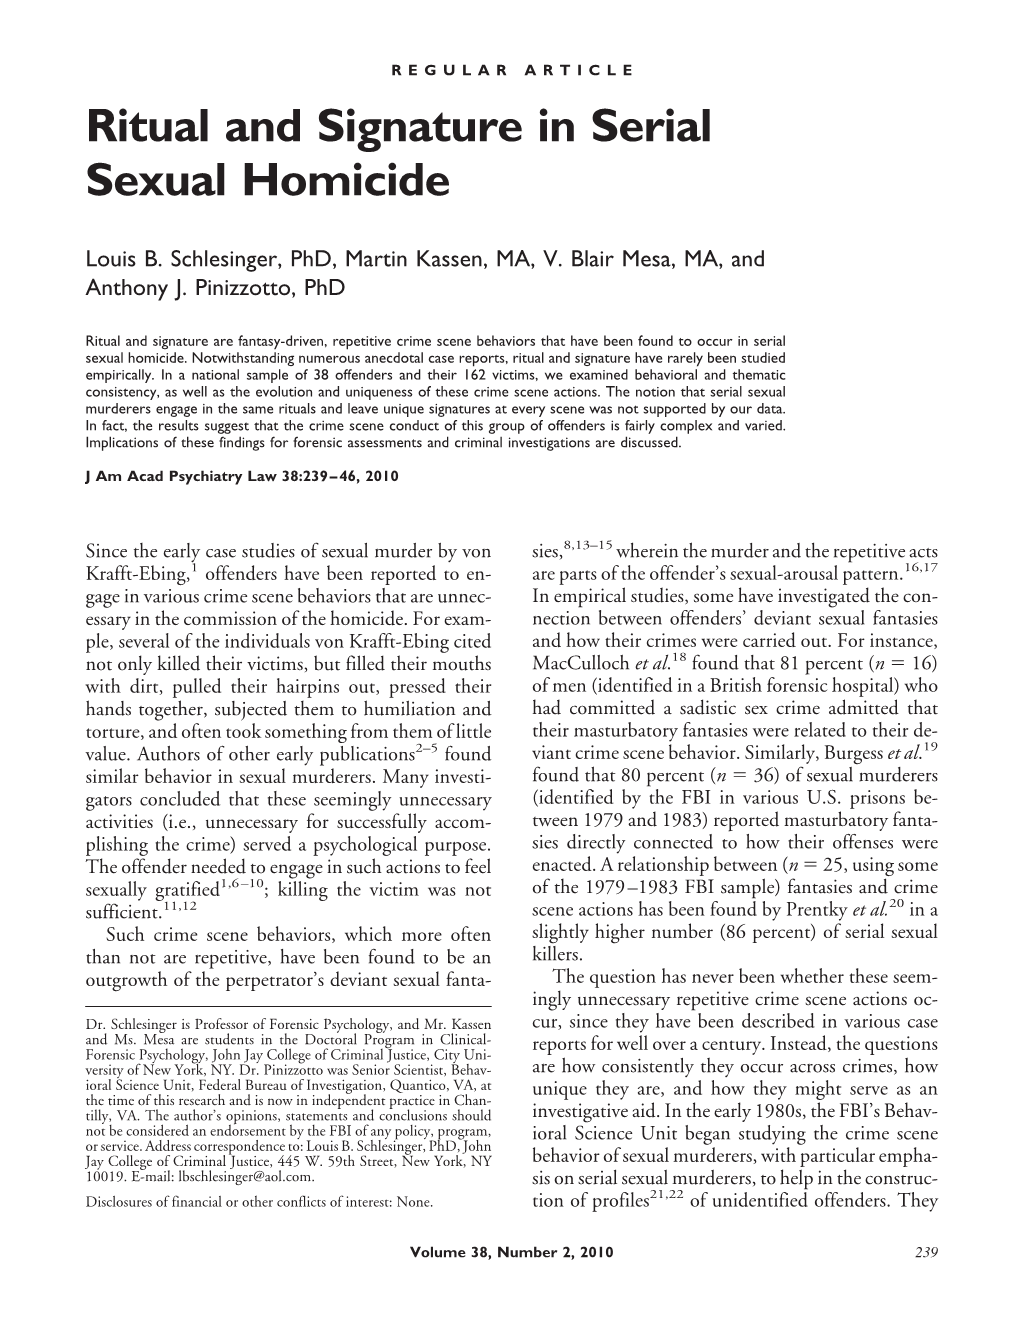 Ritual and Signature in Serial Sexual Homicide